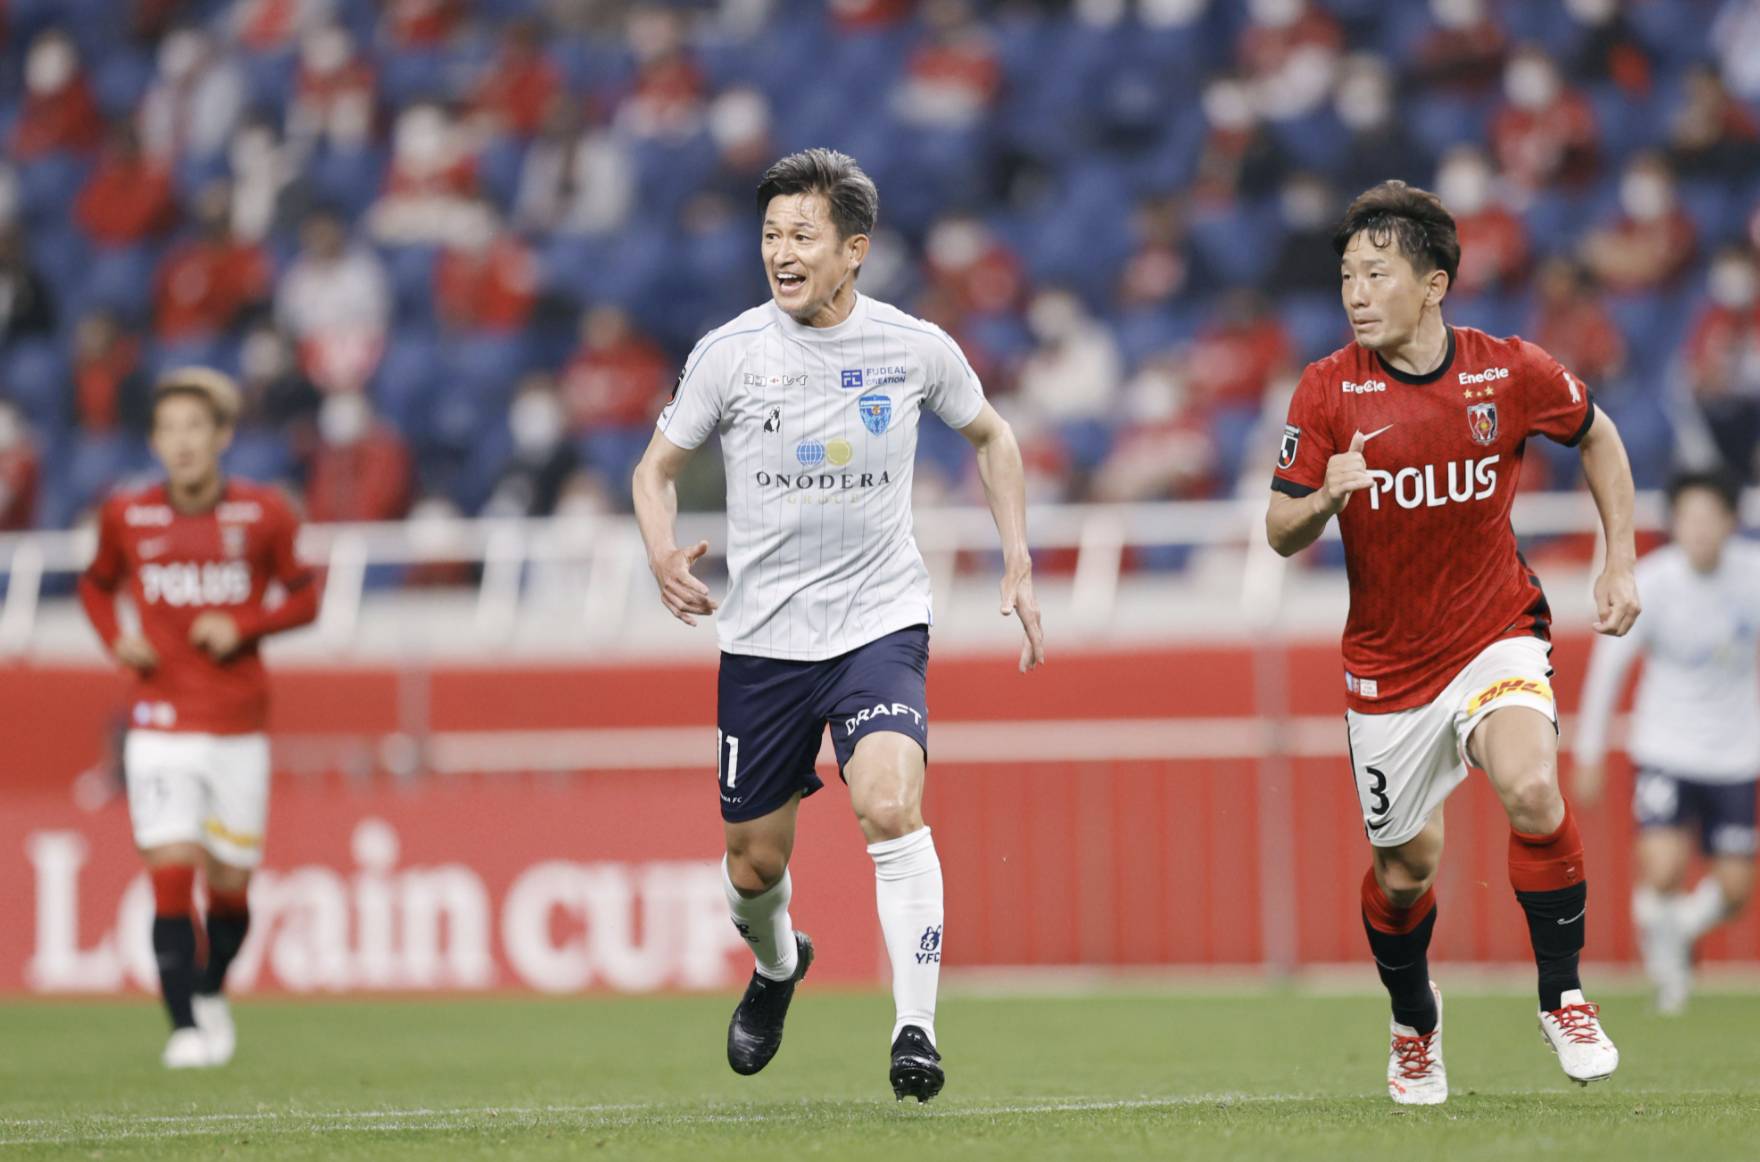 Yokohama FC's Kazuyoshi Miura (center) plays during a Levain Cup soccer match against Urawa Reds on May 19, 2021, in Saitama — extending his record as the oldest player to appear in the cup competition to 54 years, 2 months and 23 days. | KYODO